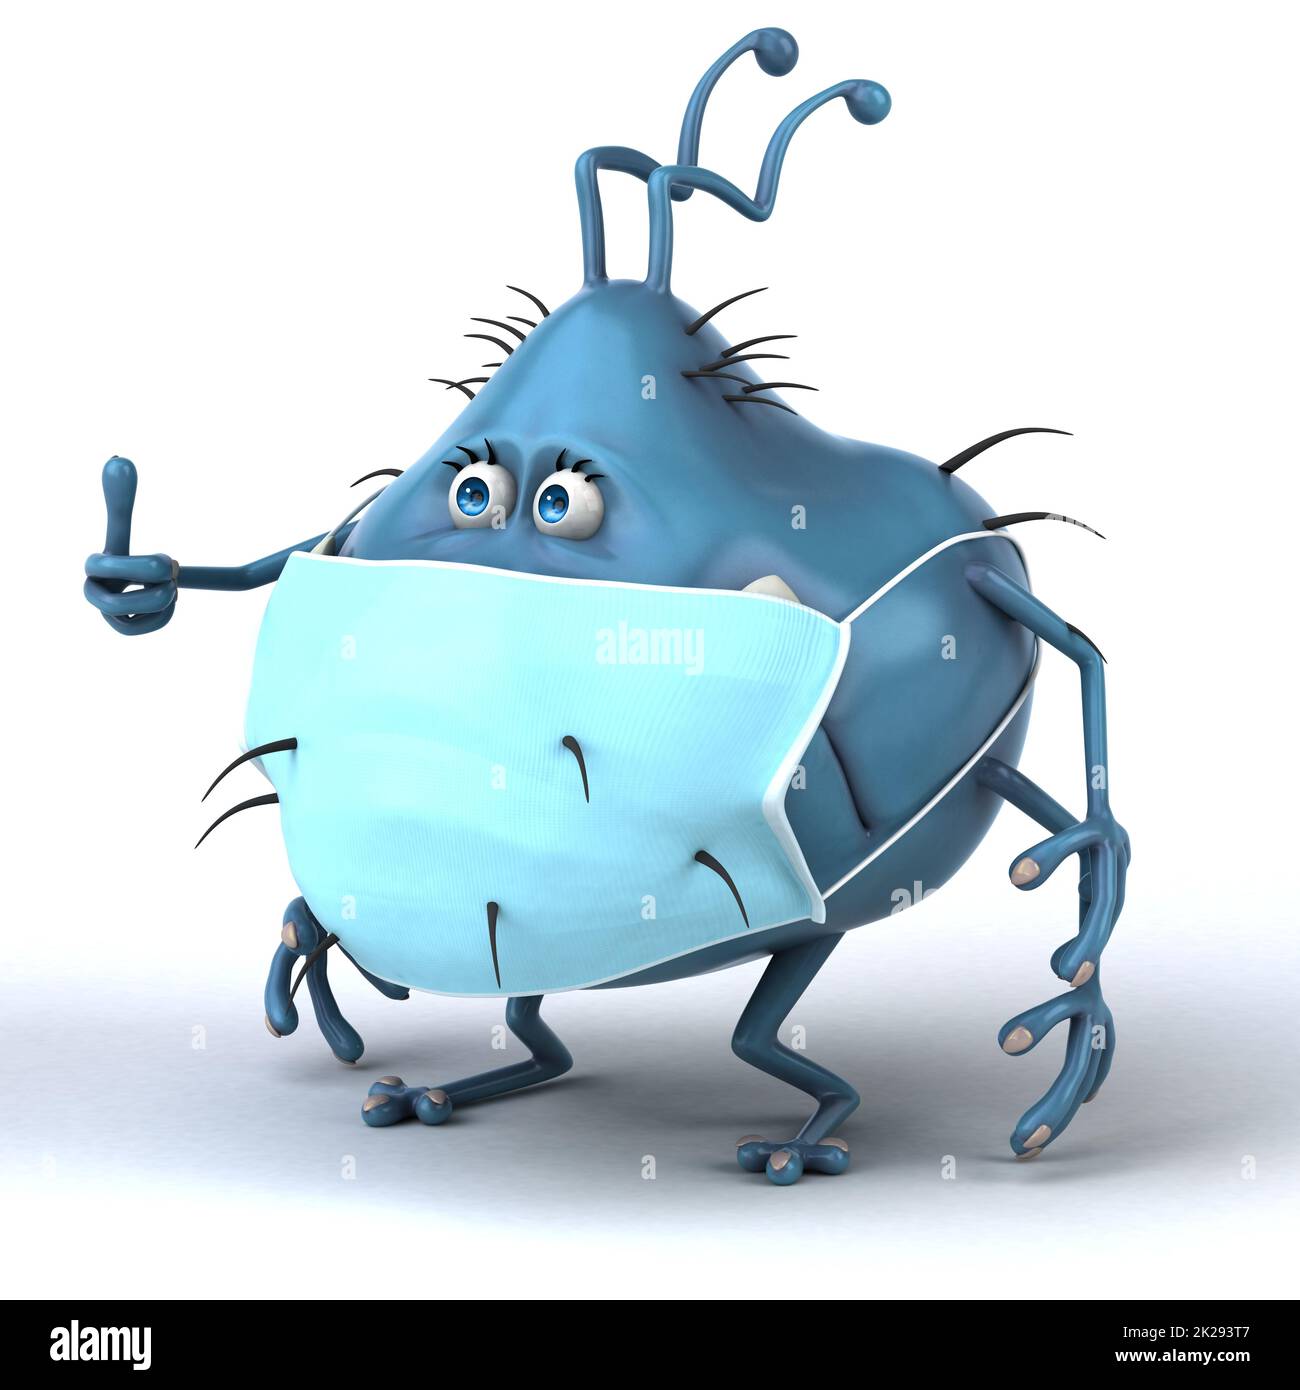 Fun 3D illustration of a cartoon microbe with a mask Stock Photo